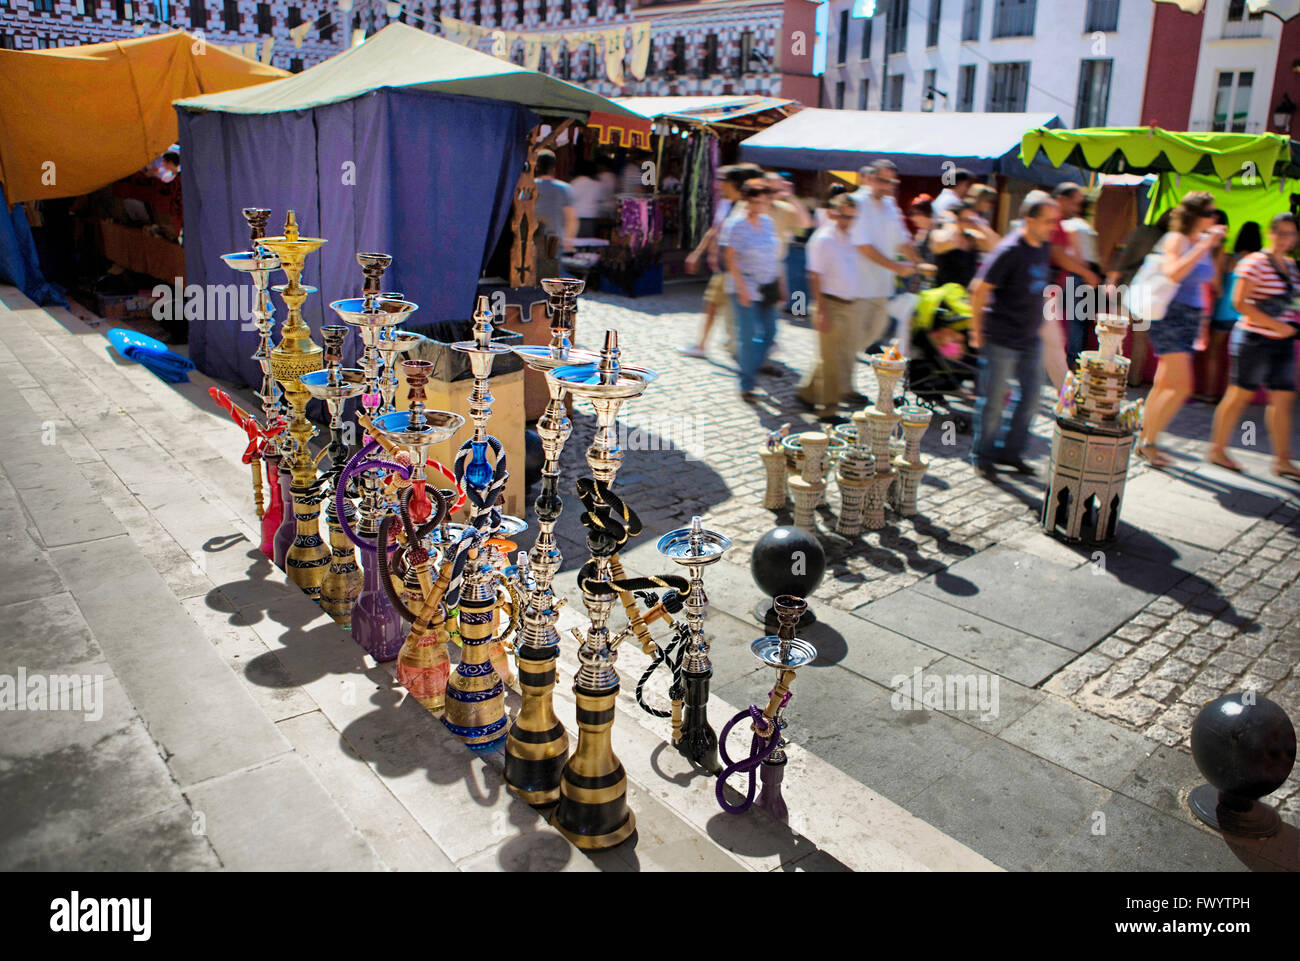 BADAJOZ, SPAIN - SEPTEMBER 25: Unidentified costumers close to tents of traditional arabic pottery at the Almossasa Culture Fest Stock Photo